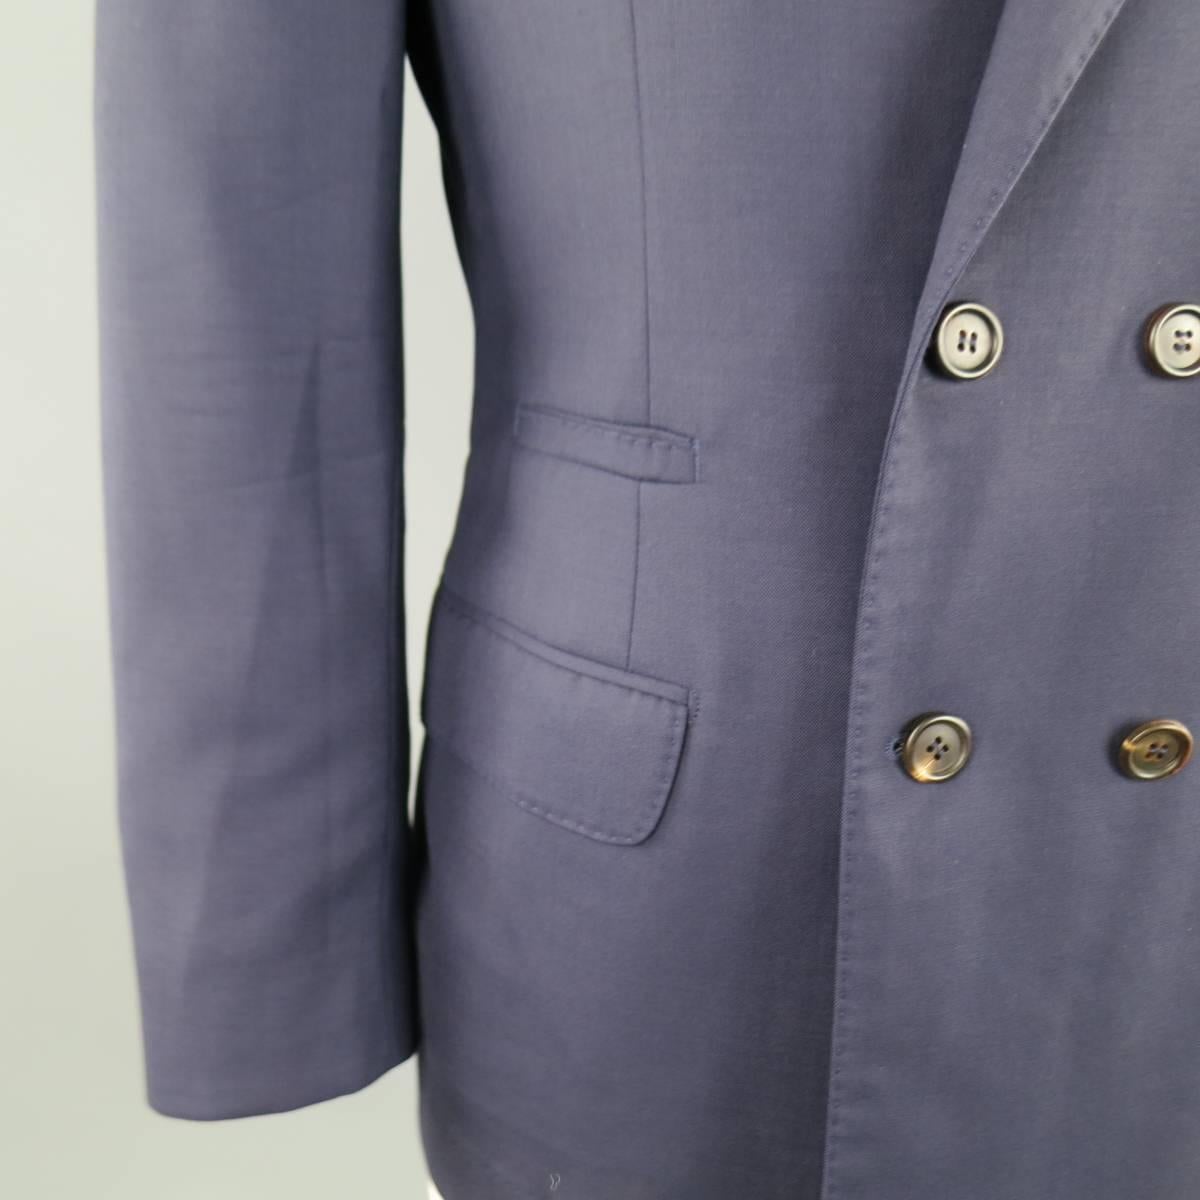 BRUNELLO CUCINELLI Sport Coat consists of wool material in navy color tone. Designed in a double-breast front, peak lapel collar and 4 button sleeve cuffs. Detailed  with a top pocket square and bottom flap pockets. Double back vent with half